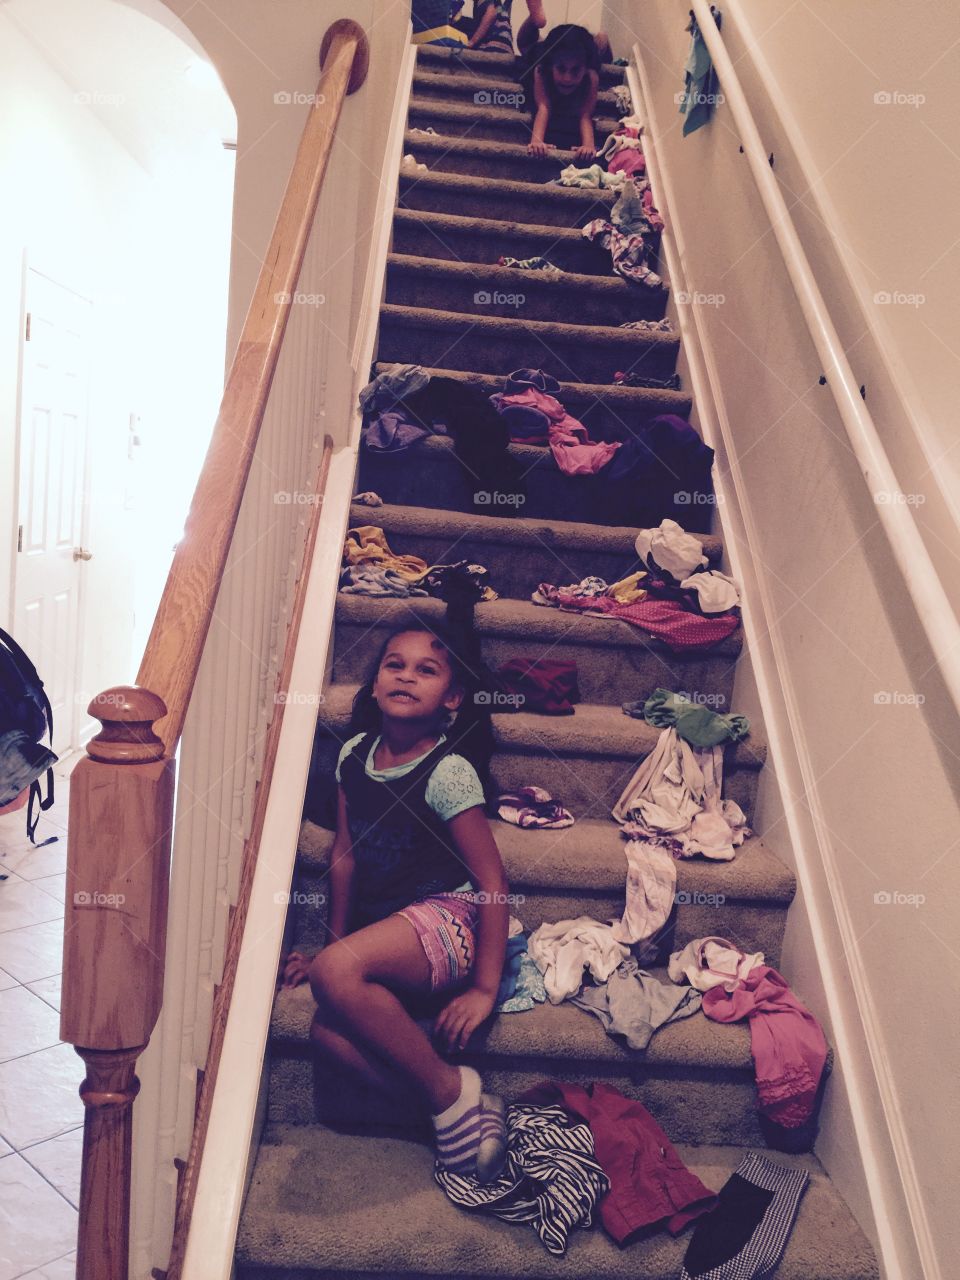 Laundry. Asked the kids to bring me their hamper of laundry, and they threw everything down the stairs...